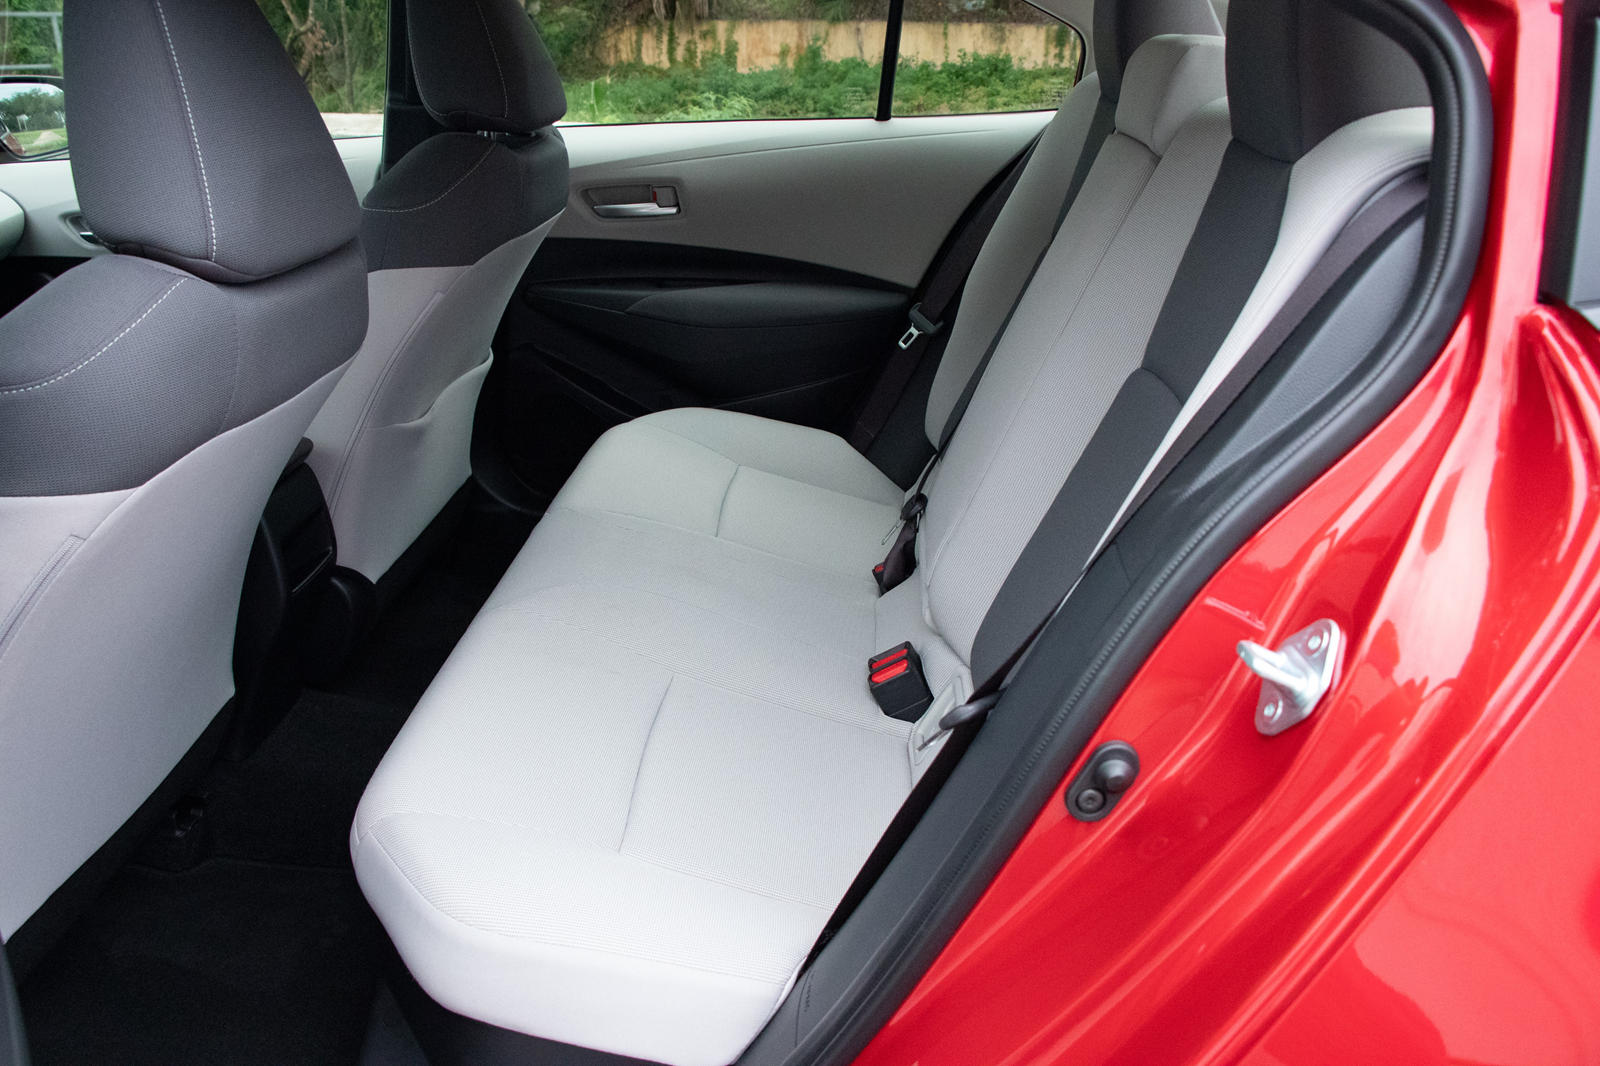 TOYOTA COROLLA - HOW TO LAY DOWN REAR SEATS 